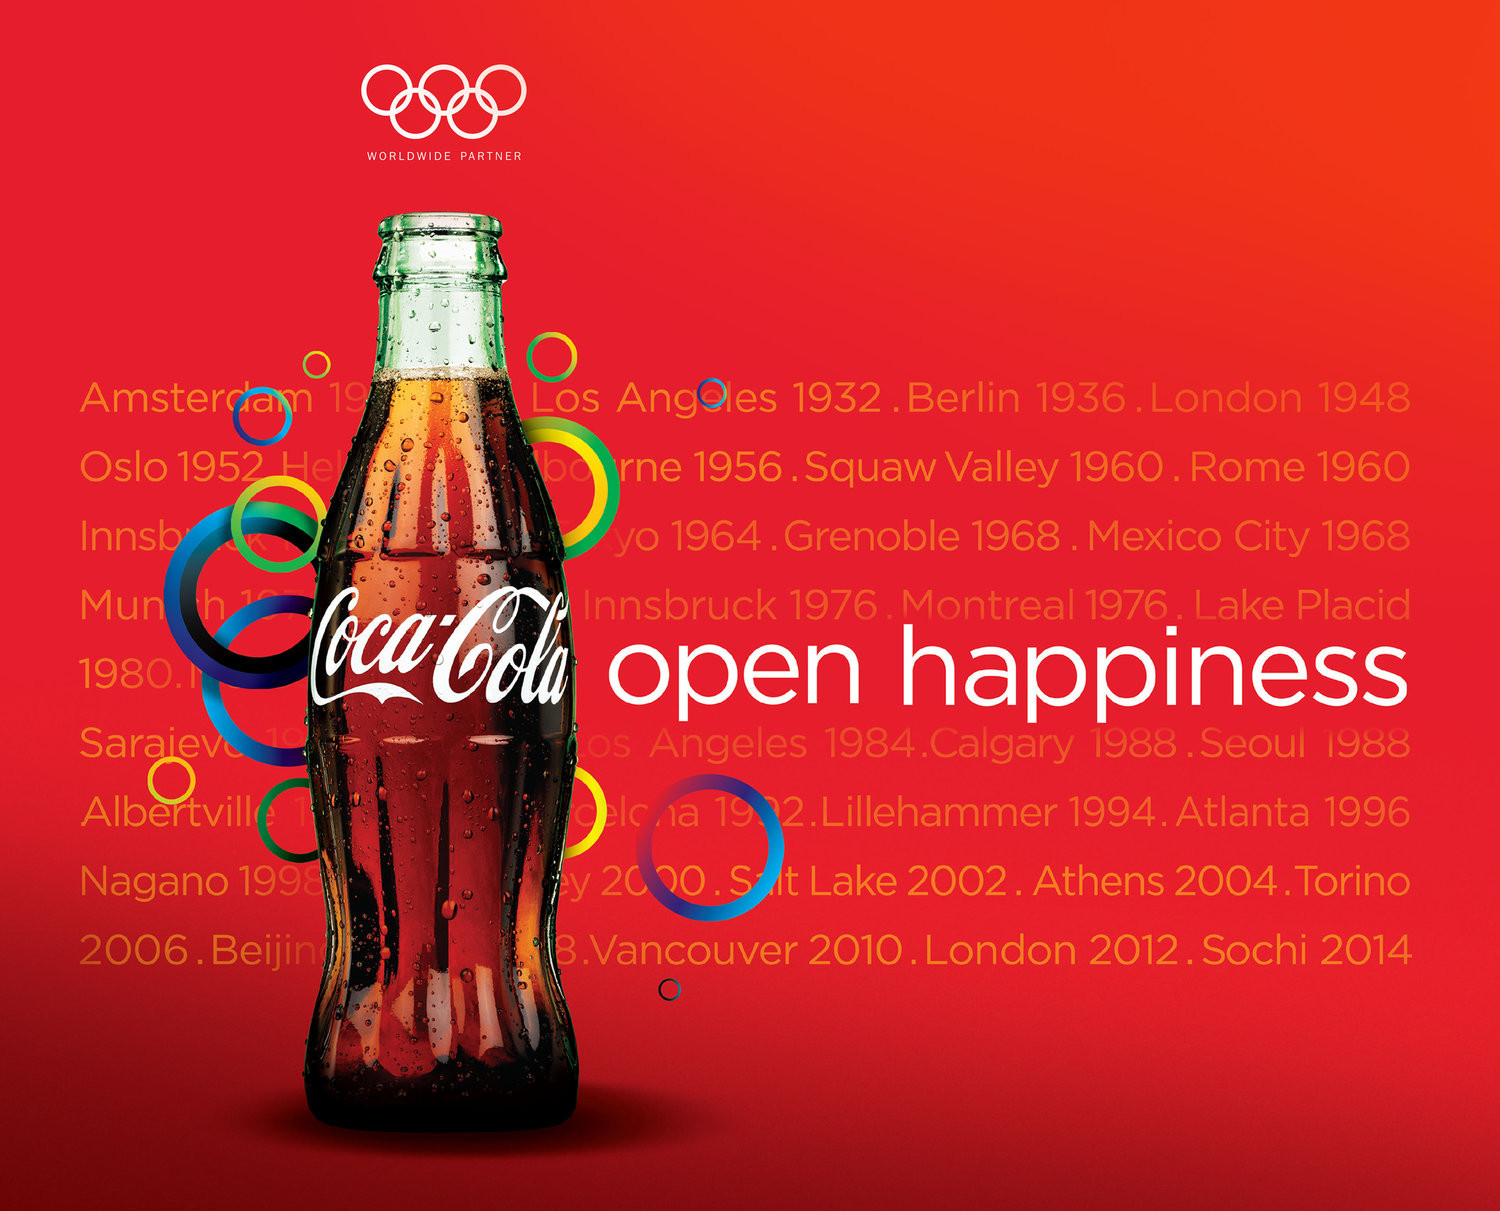 Long-time Olympic sponsor Coca-Cola have reported an 11 per cent decline in both operating income and net operating revenues for 2020 ©Coca-Cola